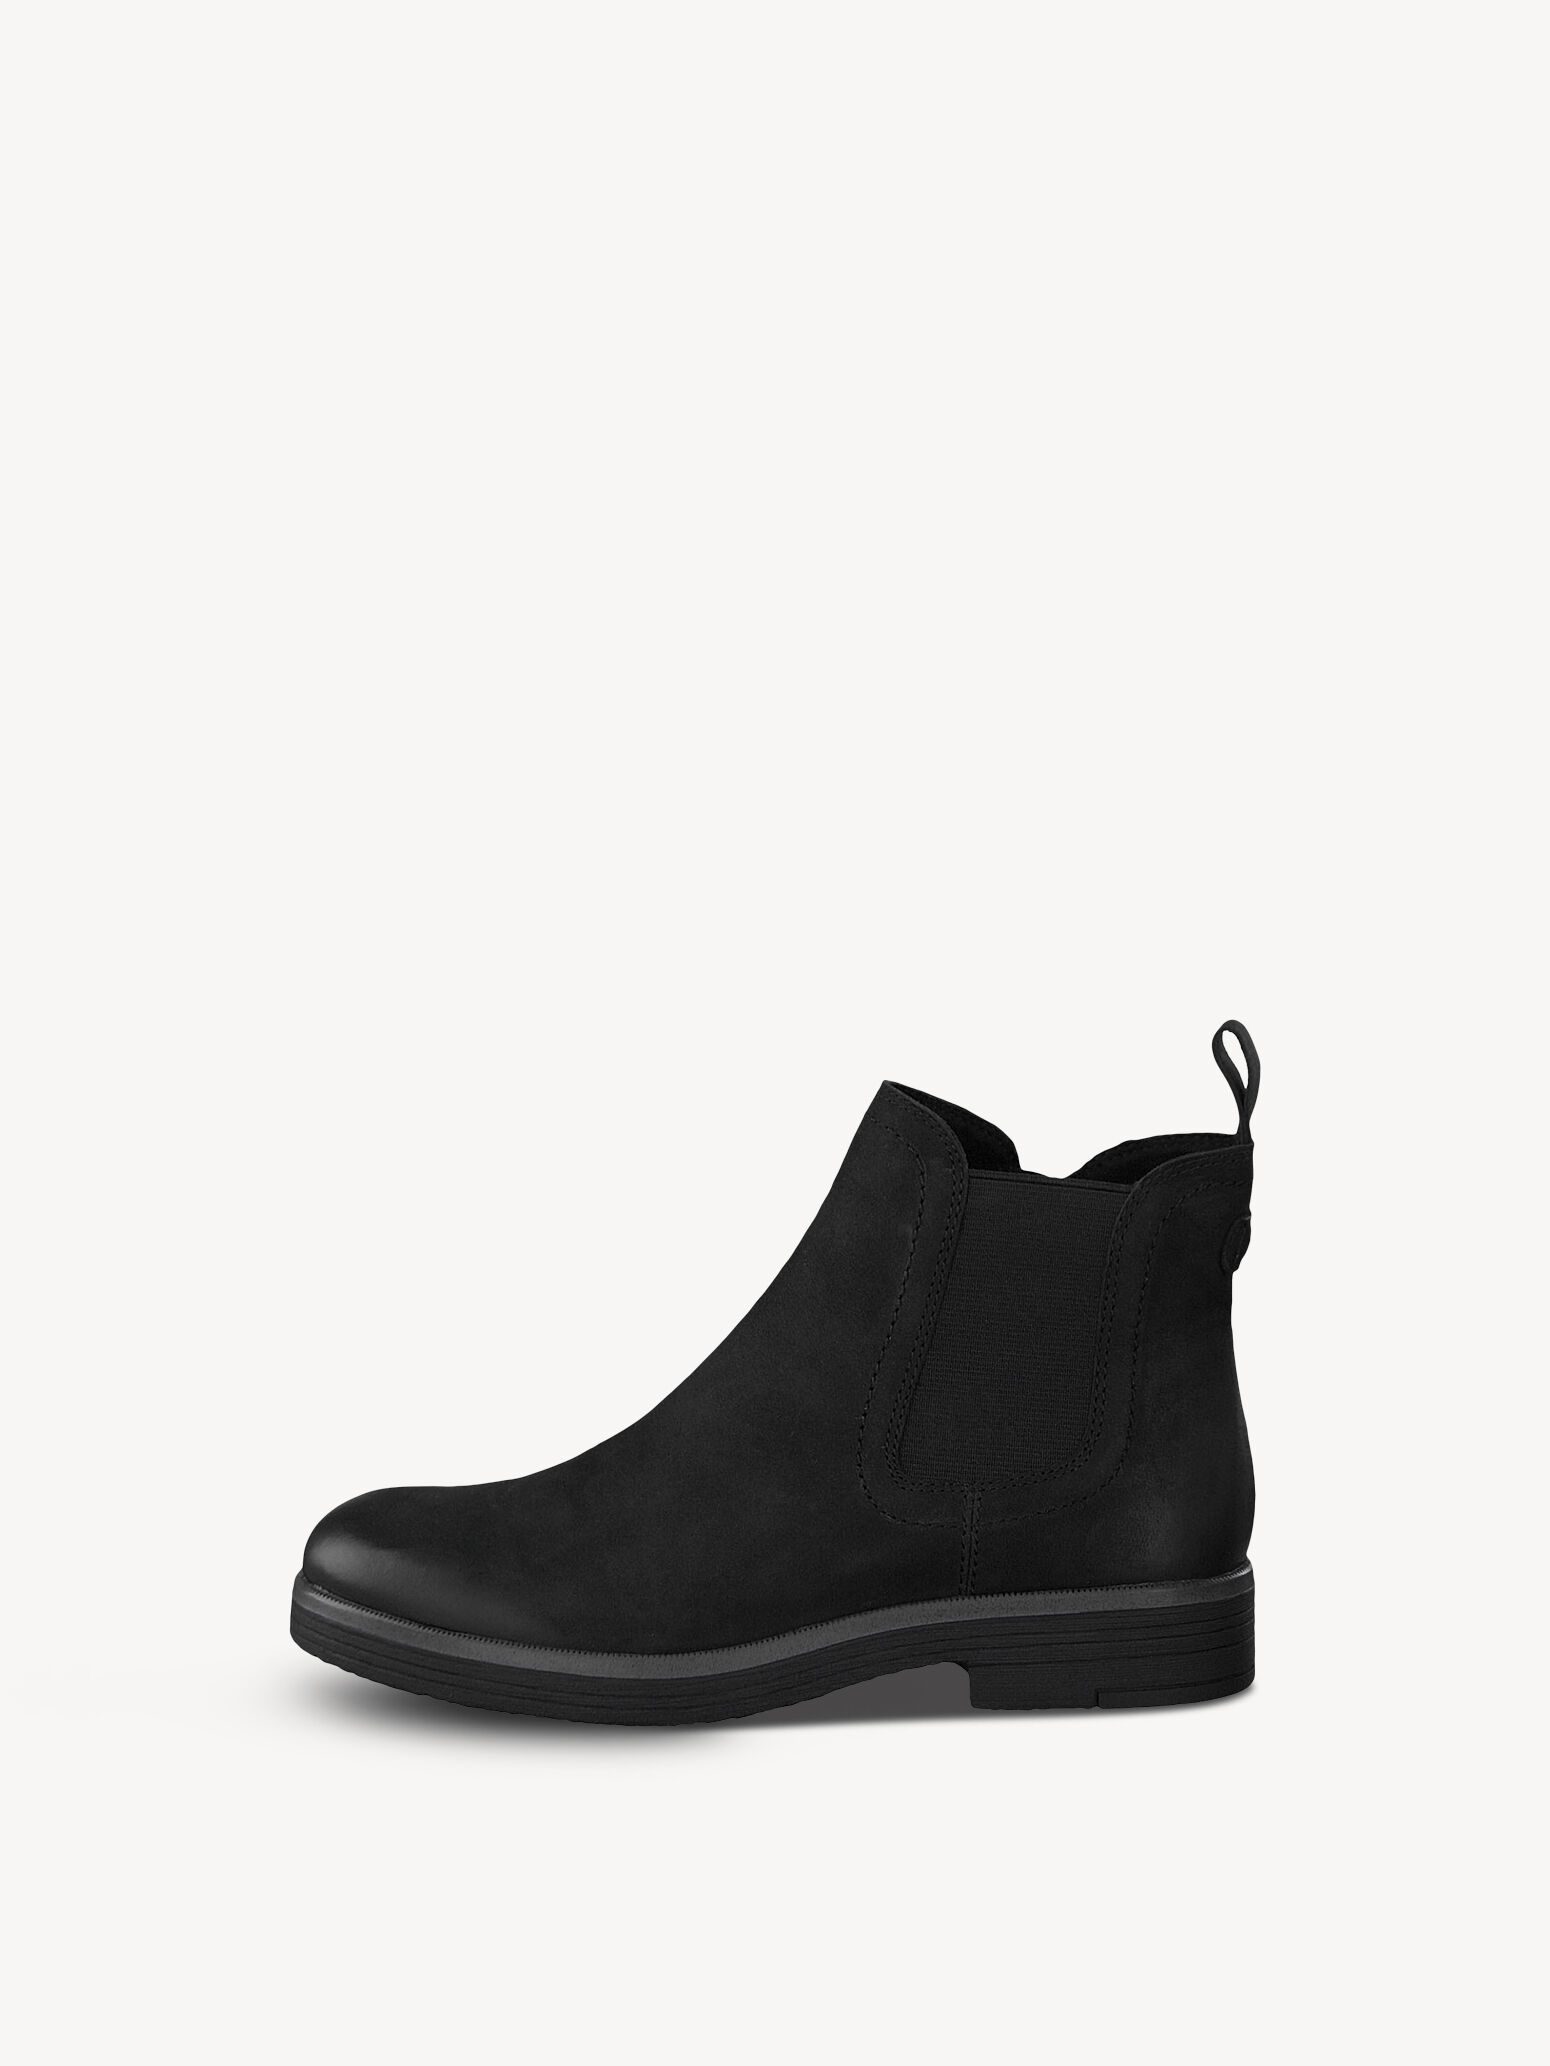 chelsea boots without heel